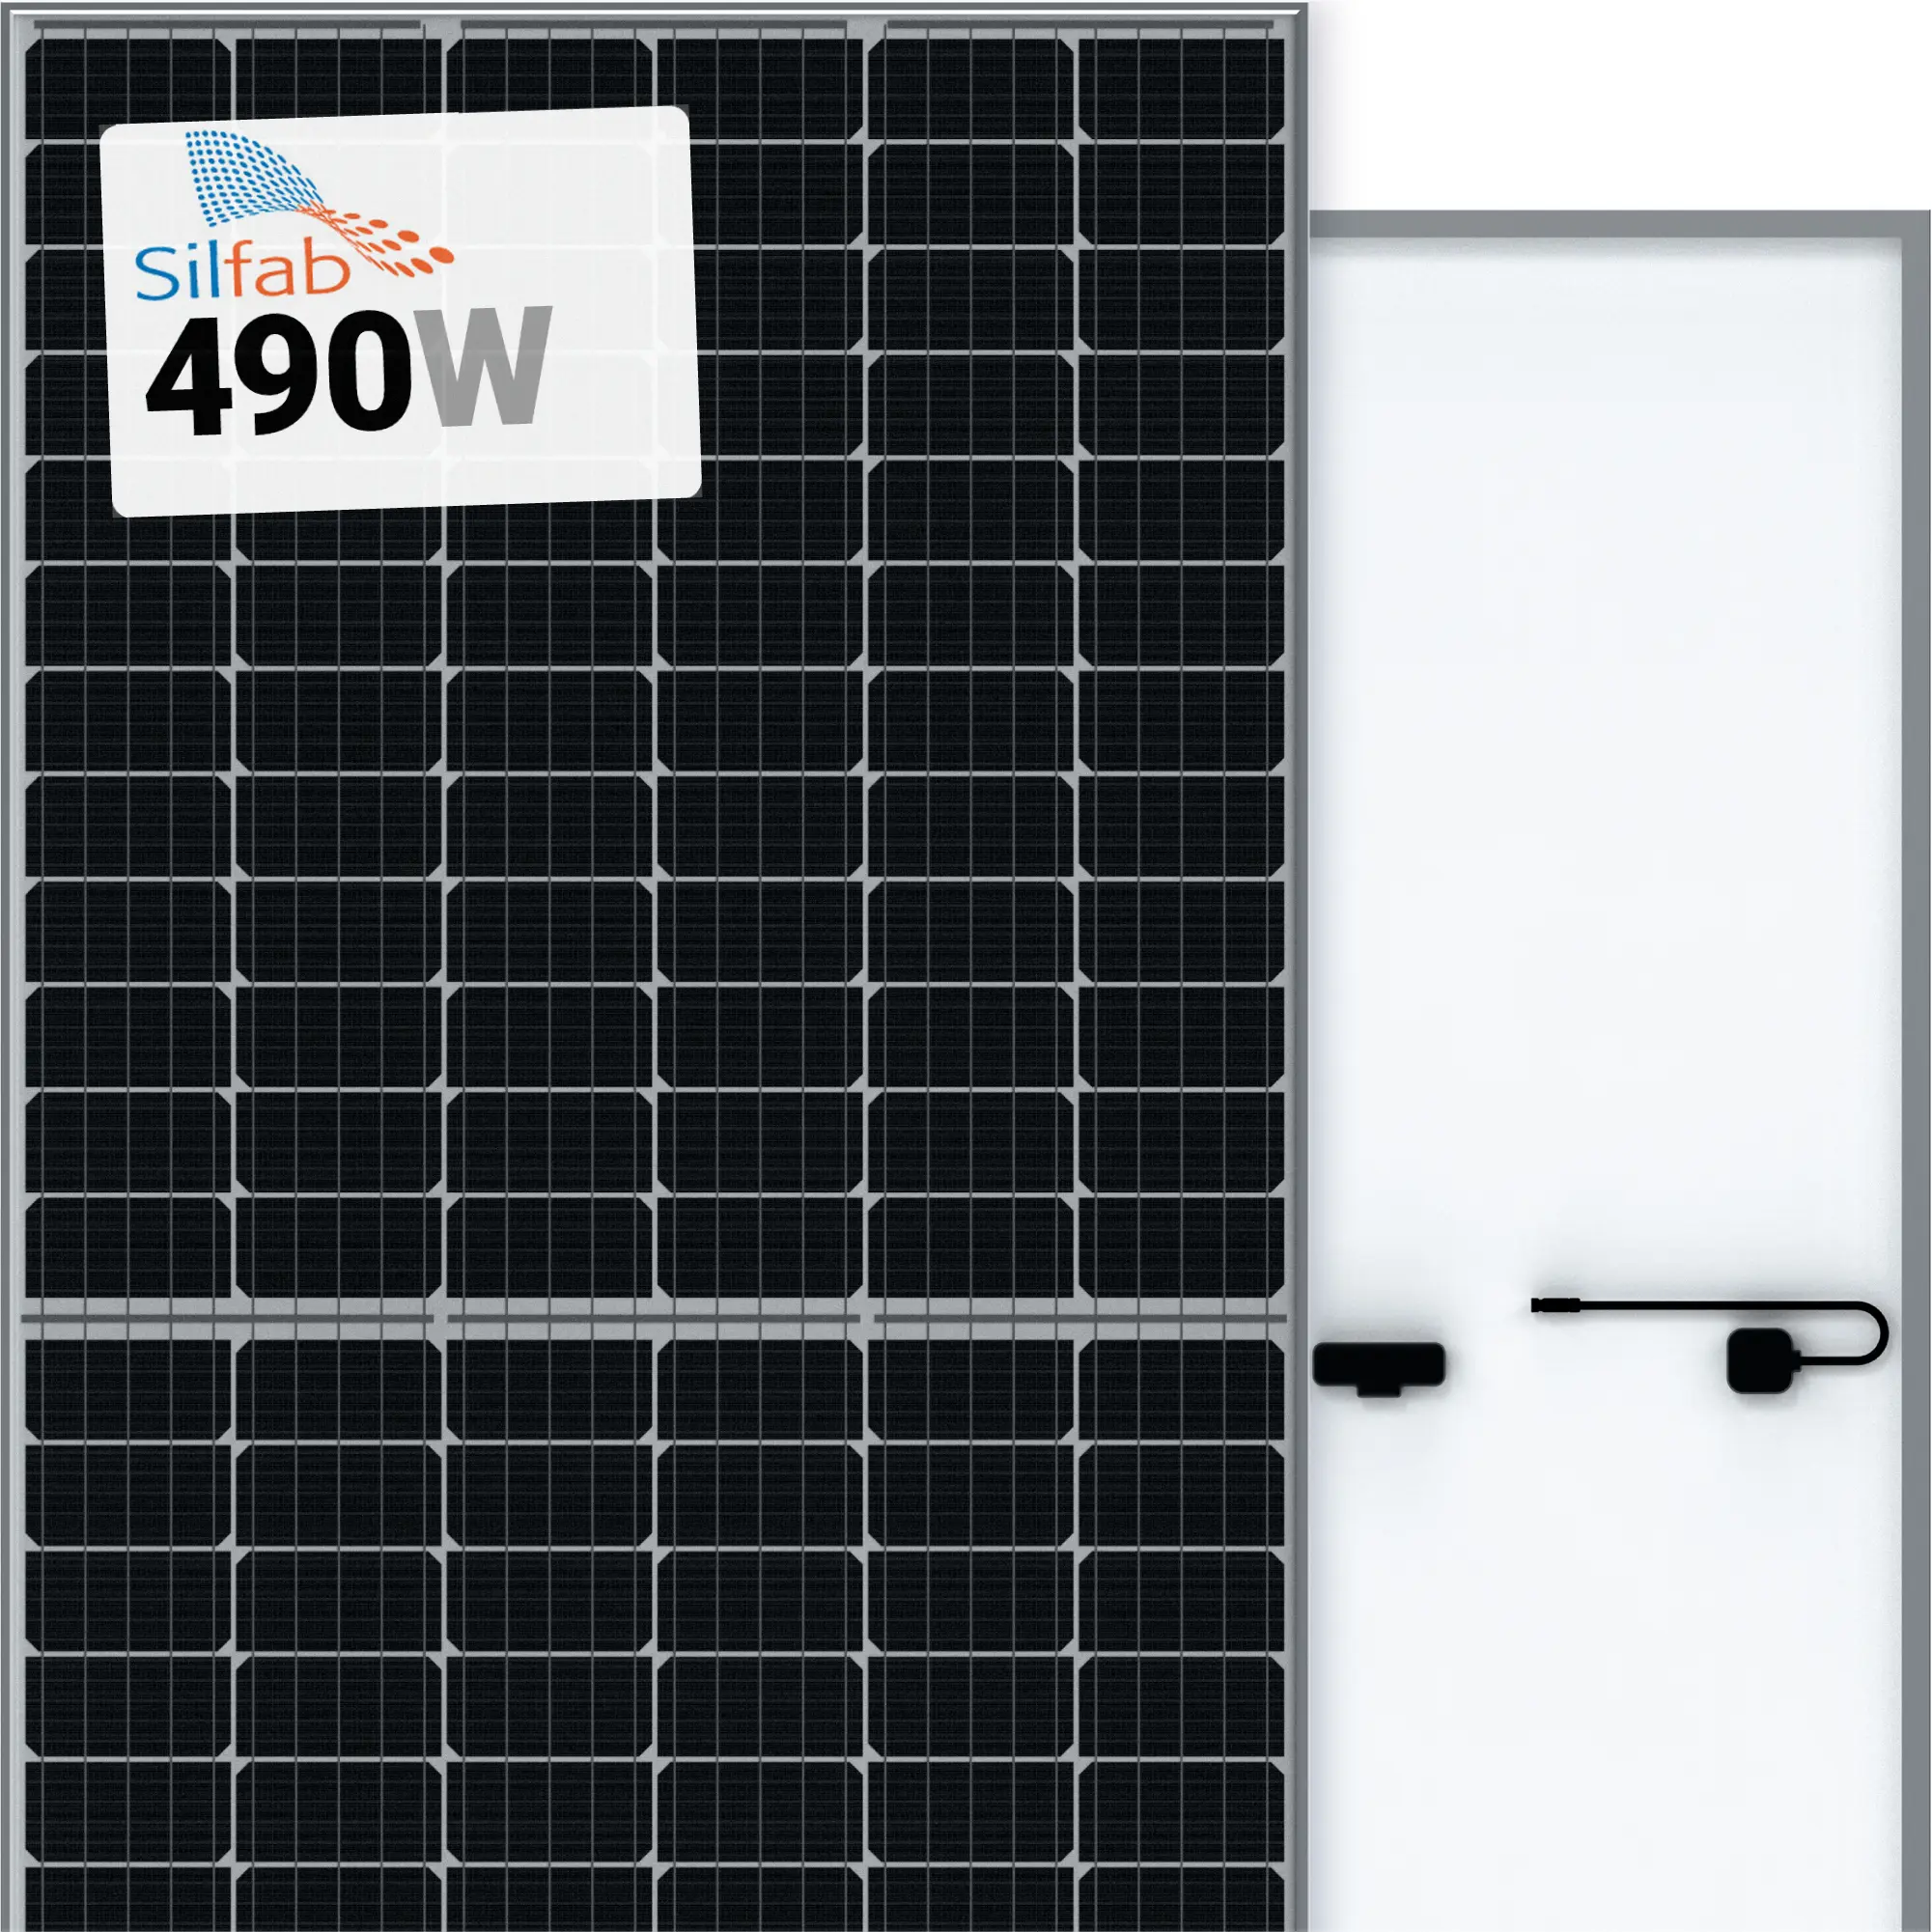 490 w solar panel - What is the current of a 540W solar panel